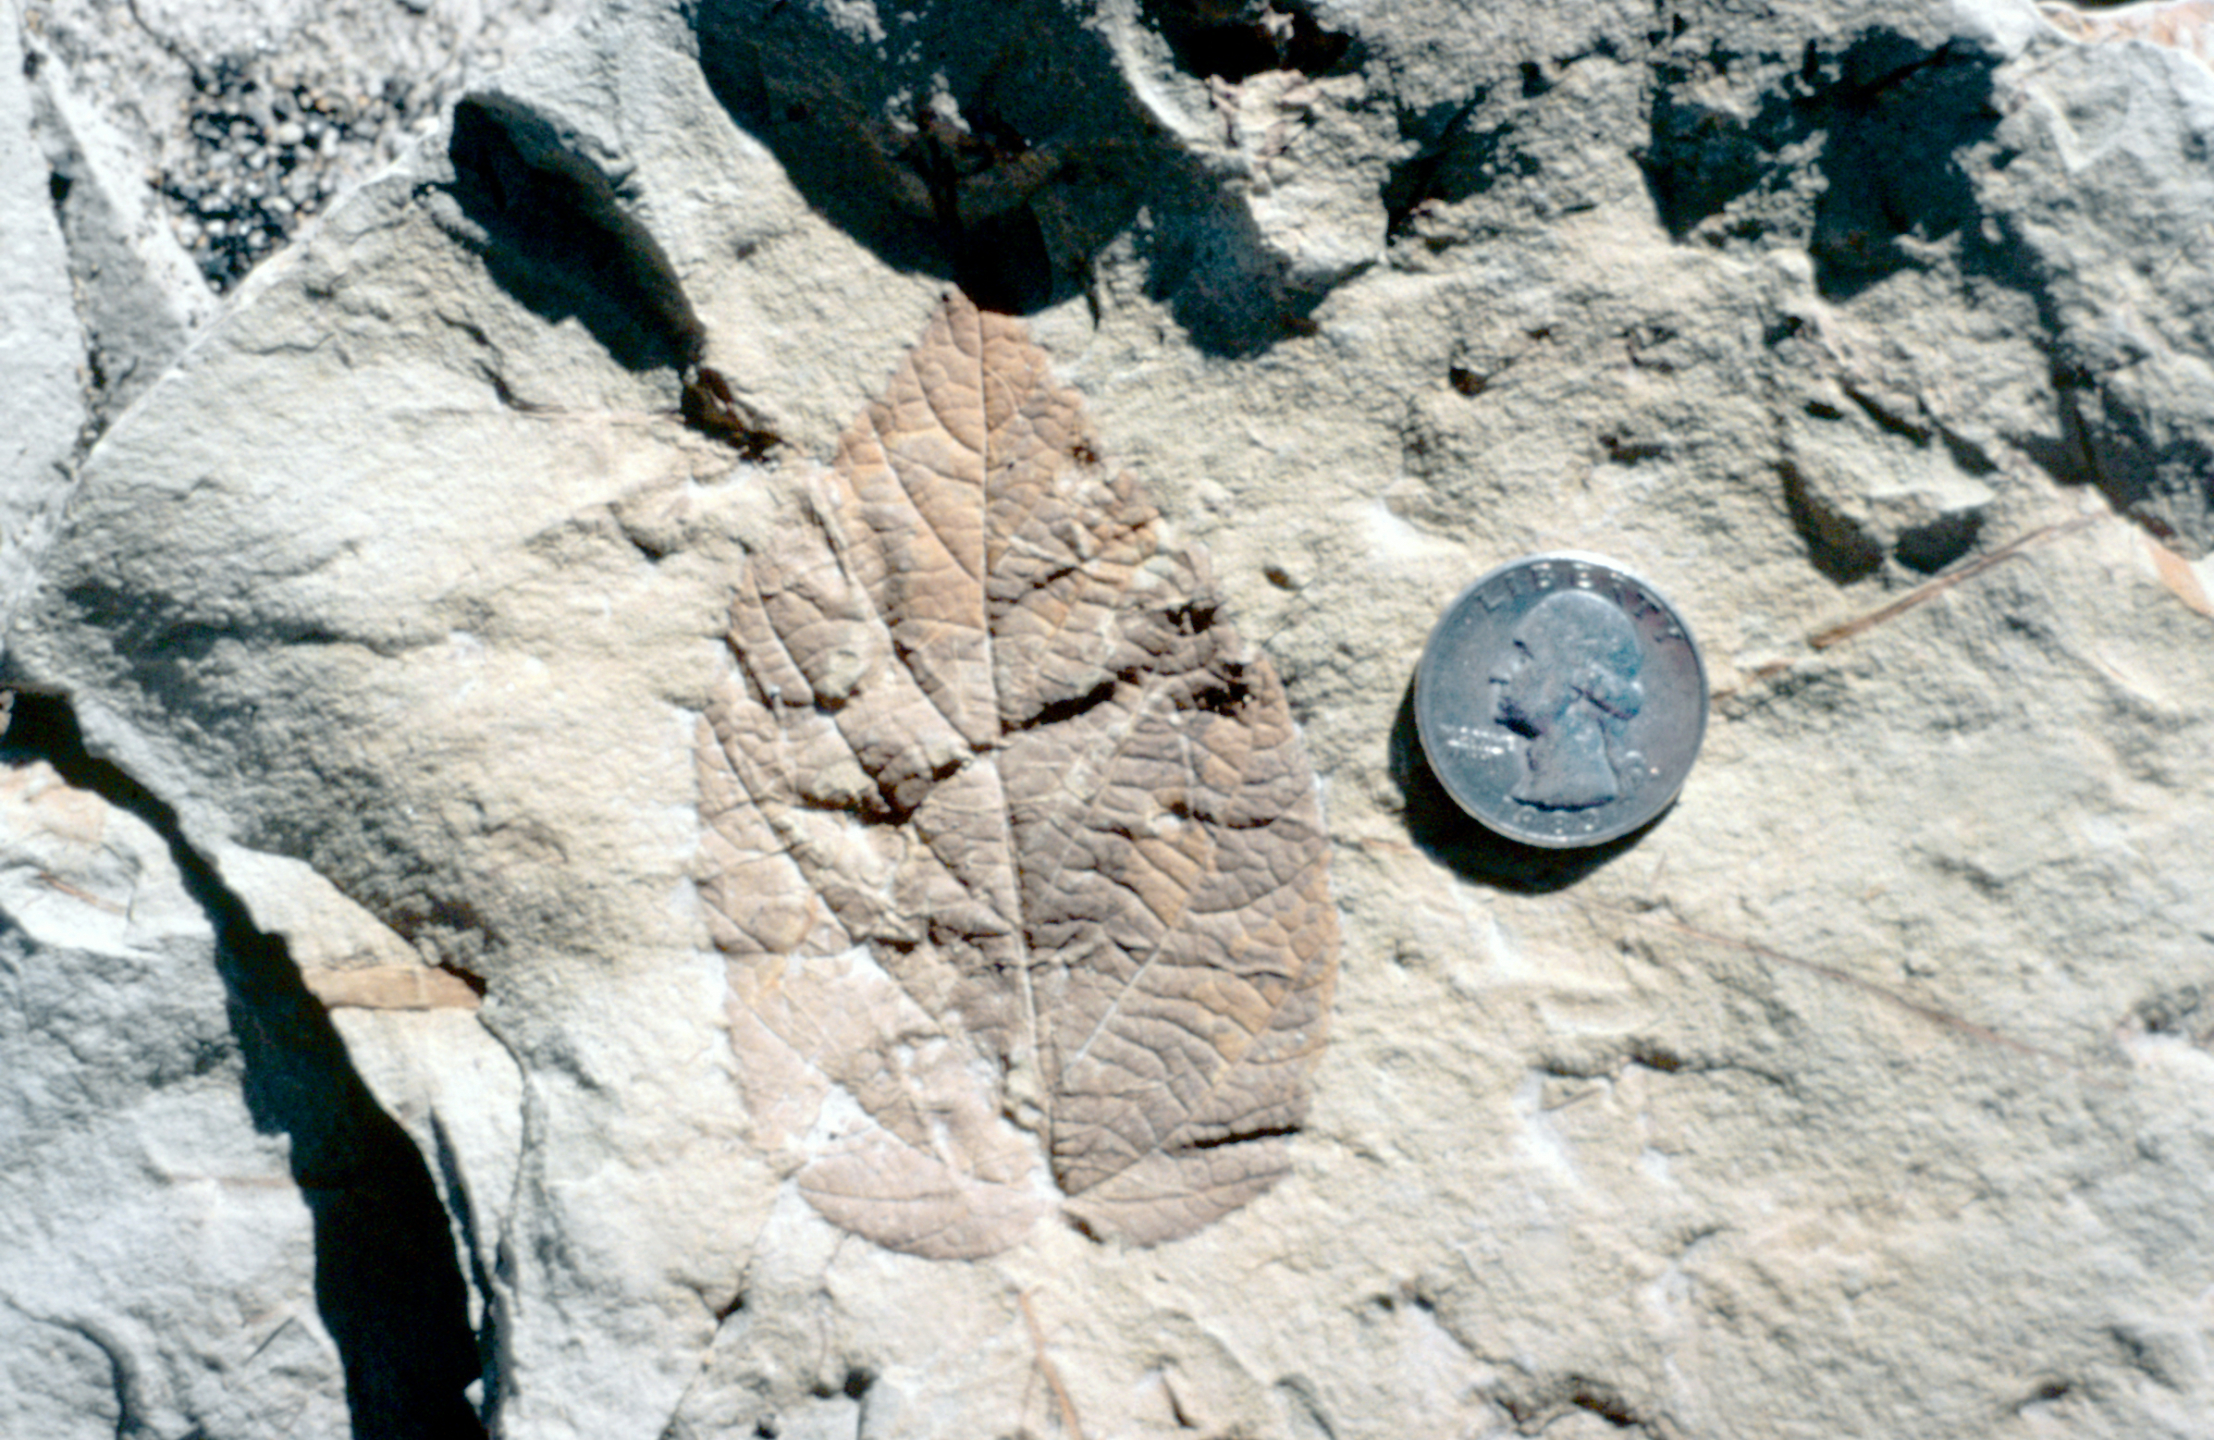 A leaf fossil imprint on a rock next to a quarter for size.